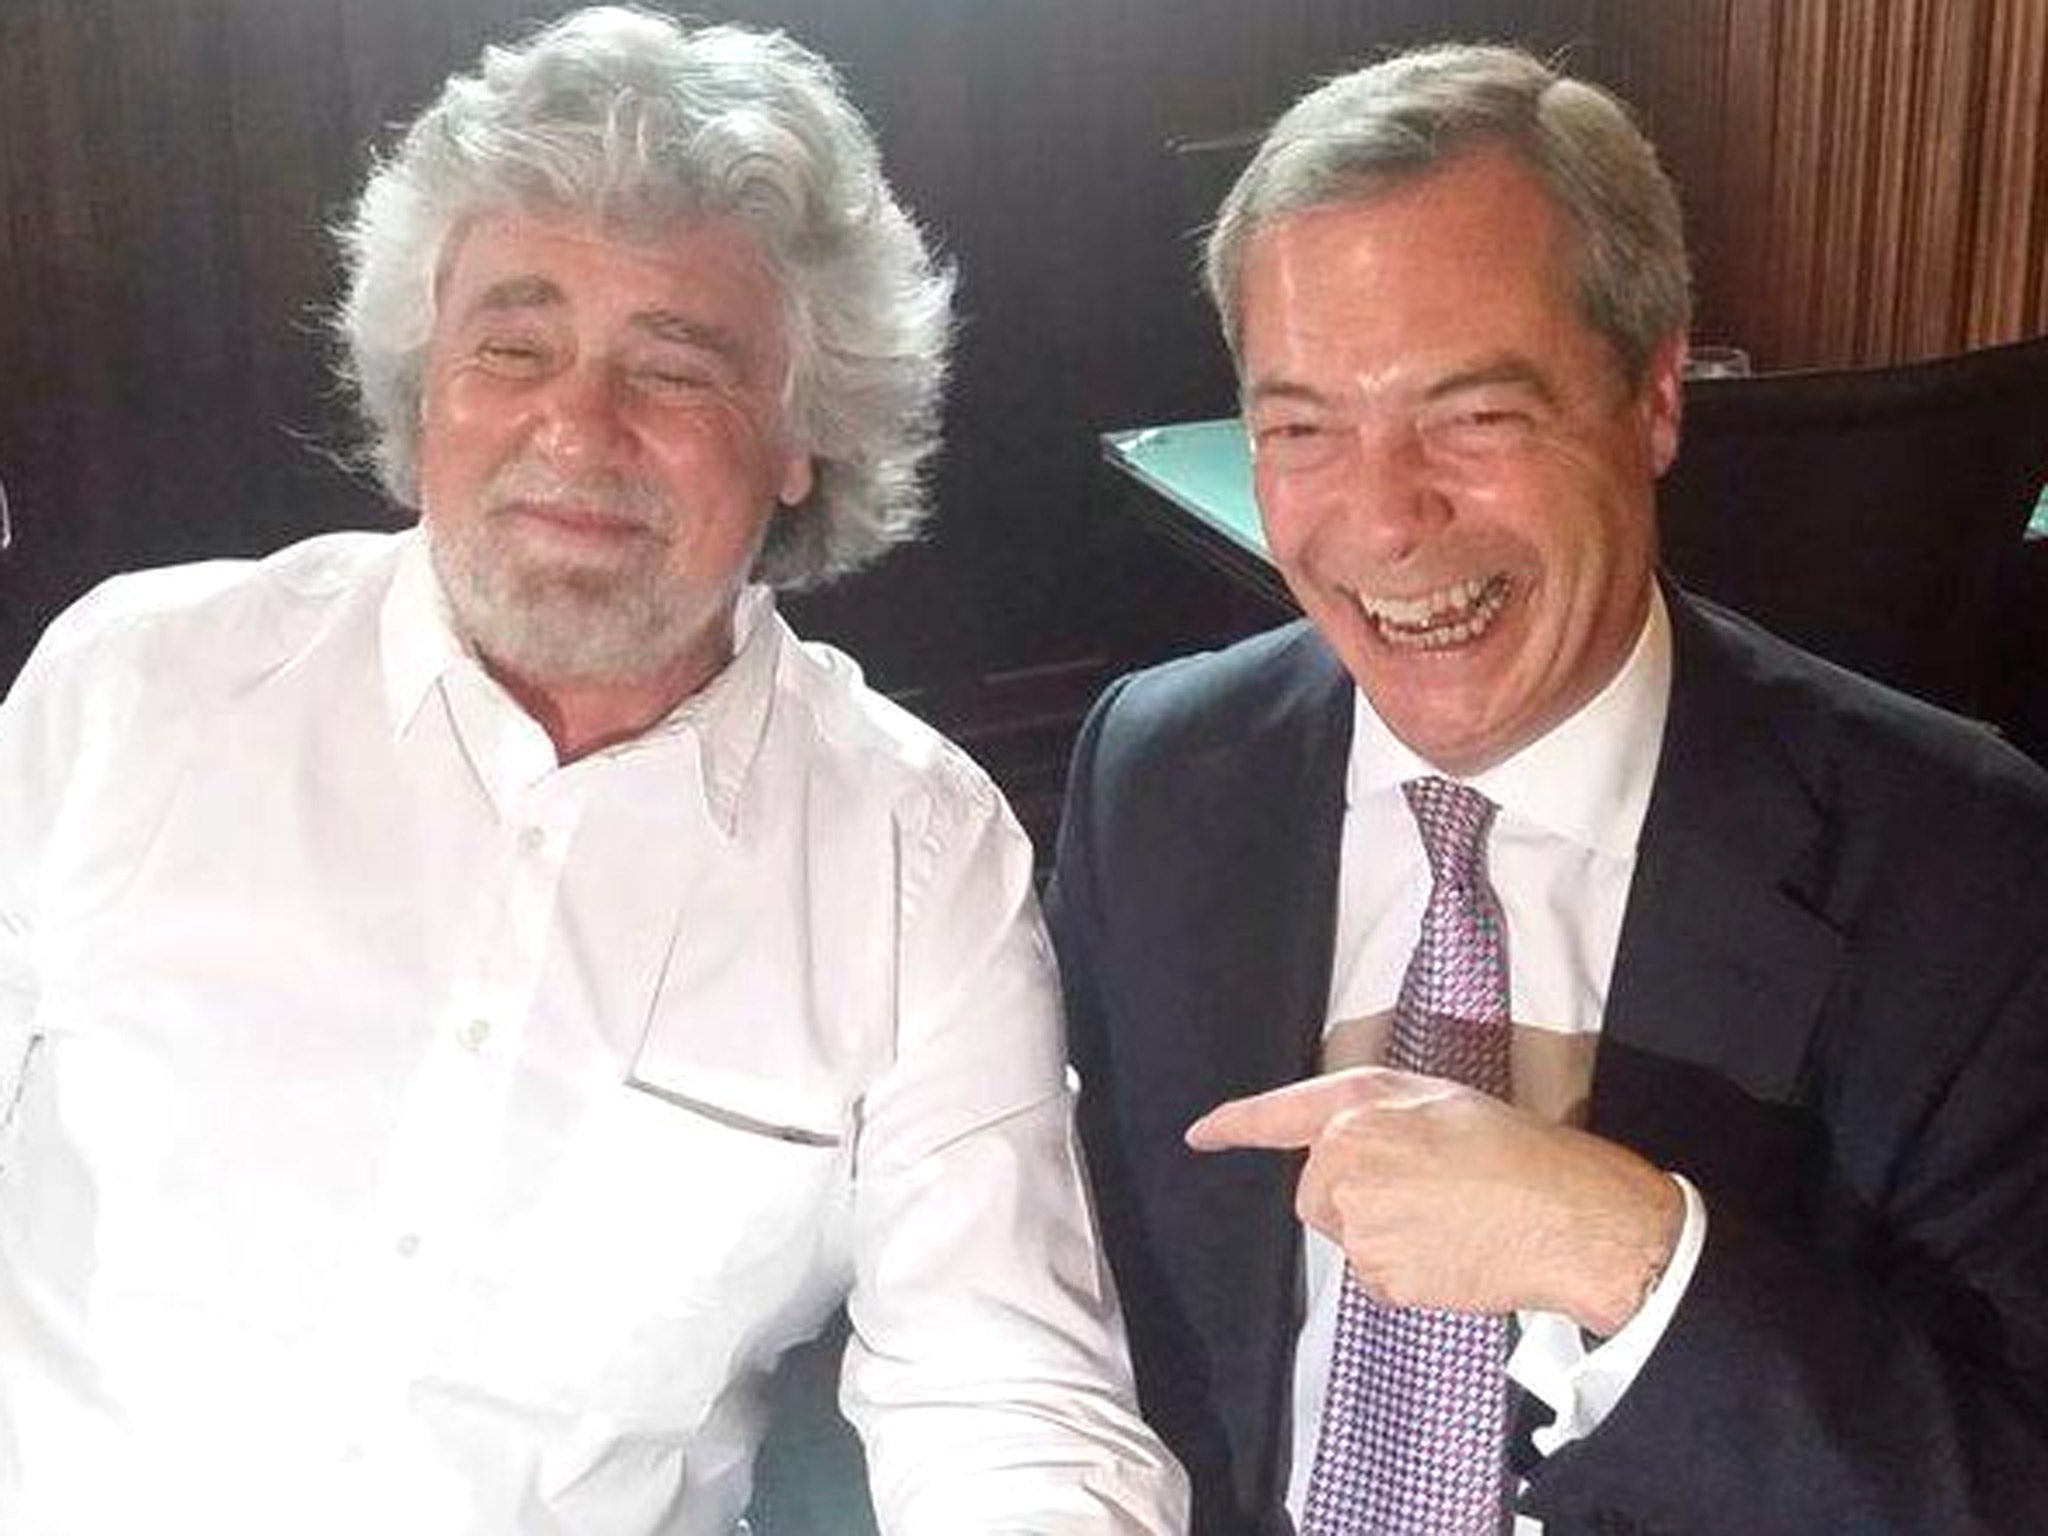 Beppe Grillo and Nigel Farage meet for lunch in Brussels